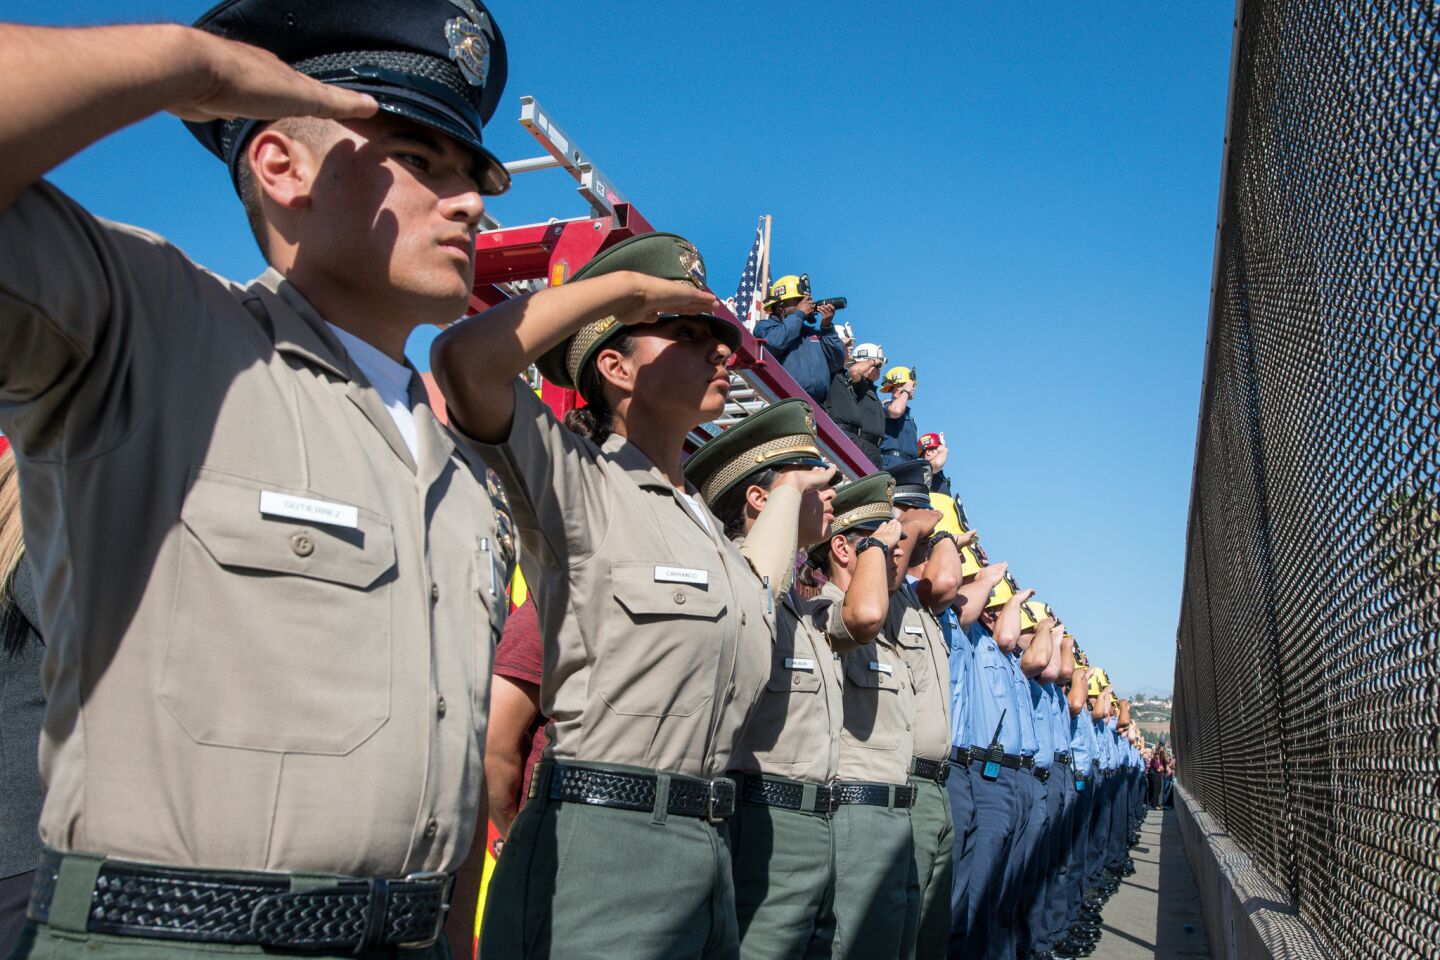 Ventura County sheriff's cadets and Oxnard College Fire Academy cadets salute as the procession carrying the body of Sgt. Ron Helus heads to the medical examiner's office in Ventura.